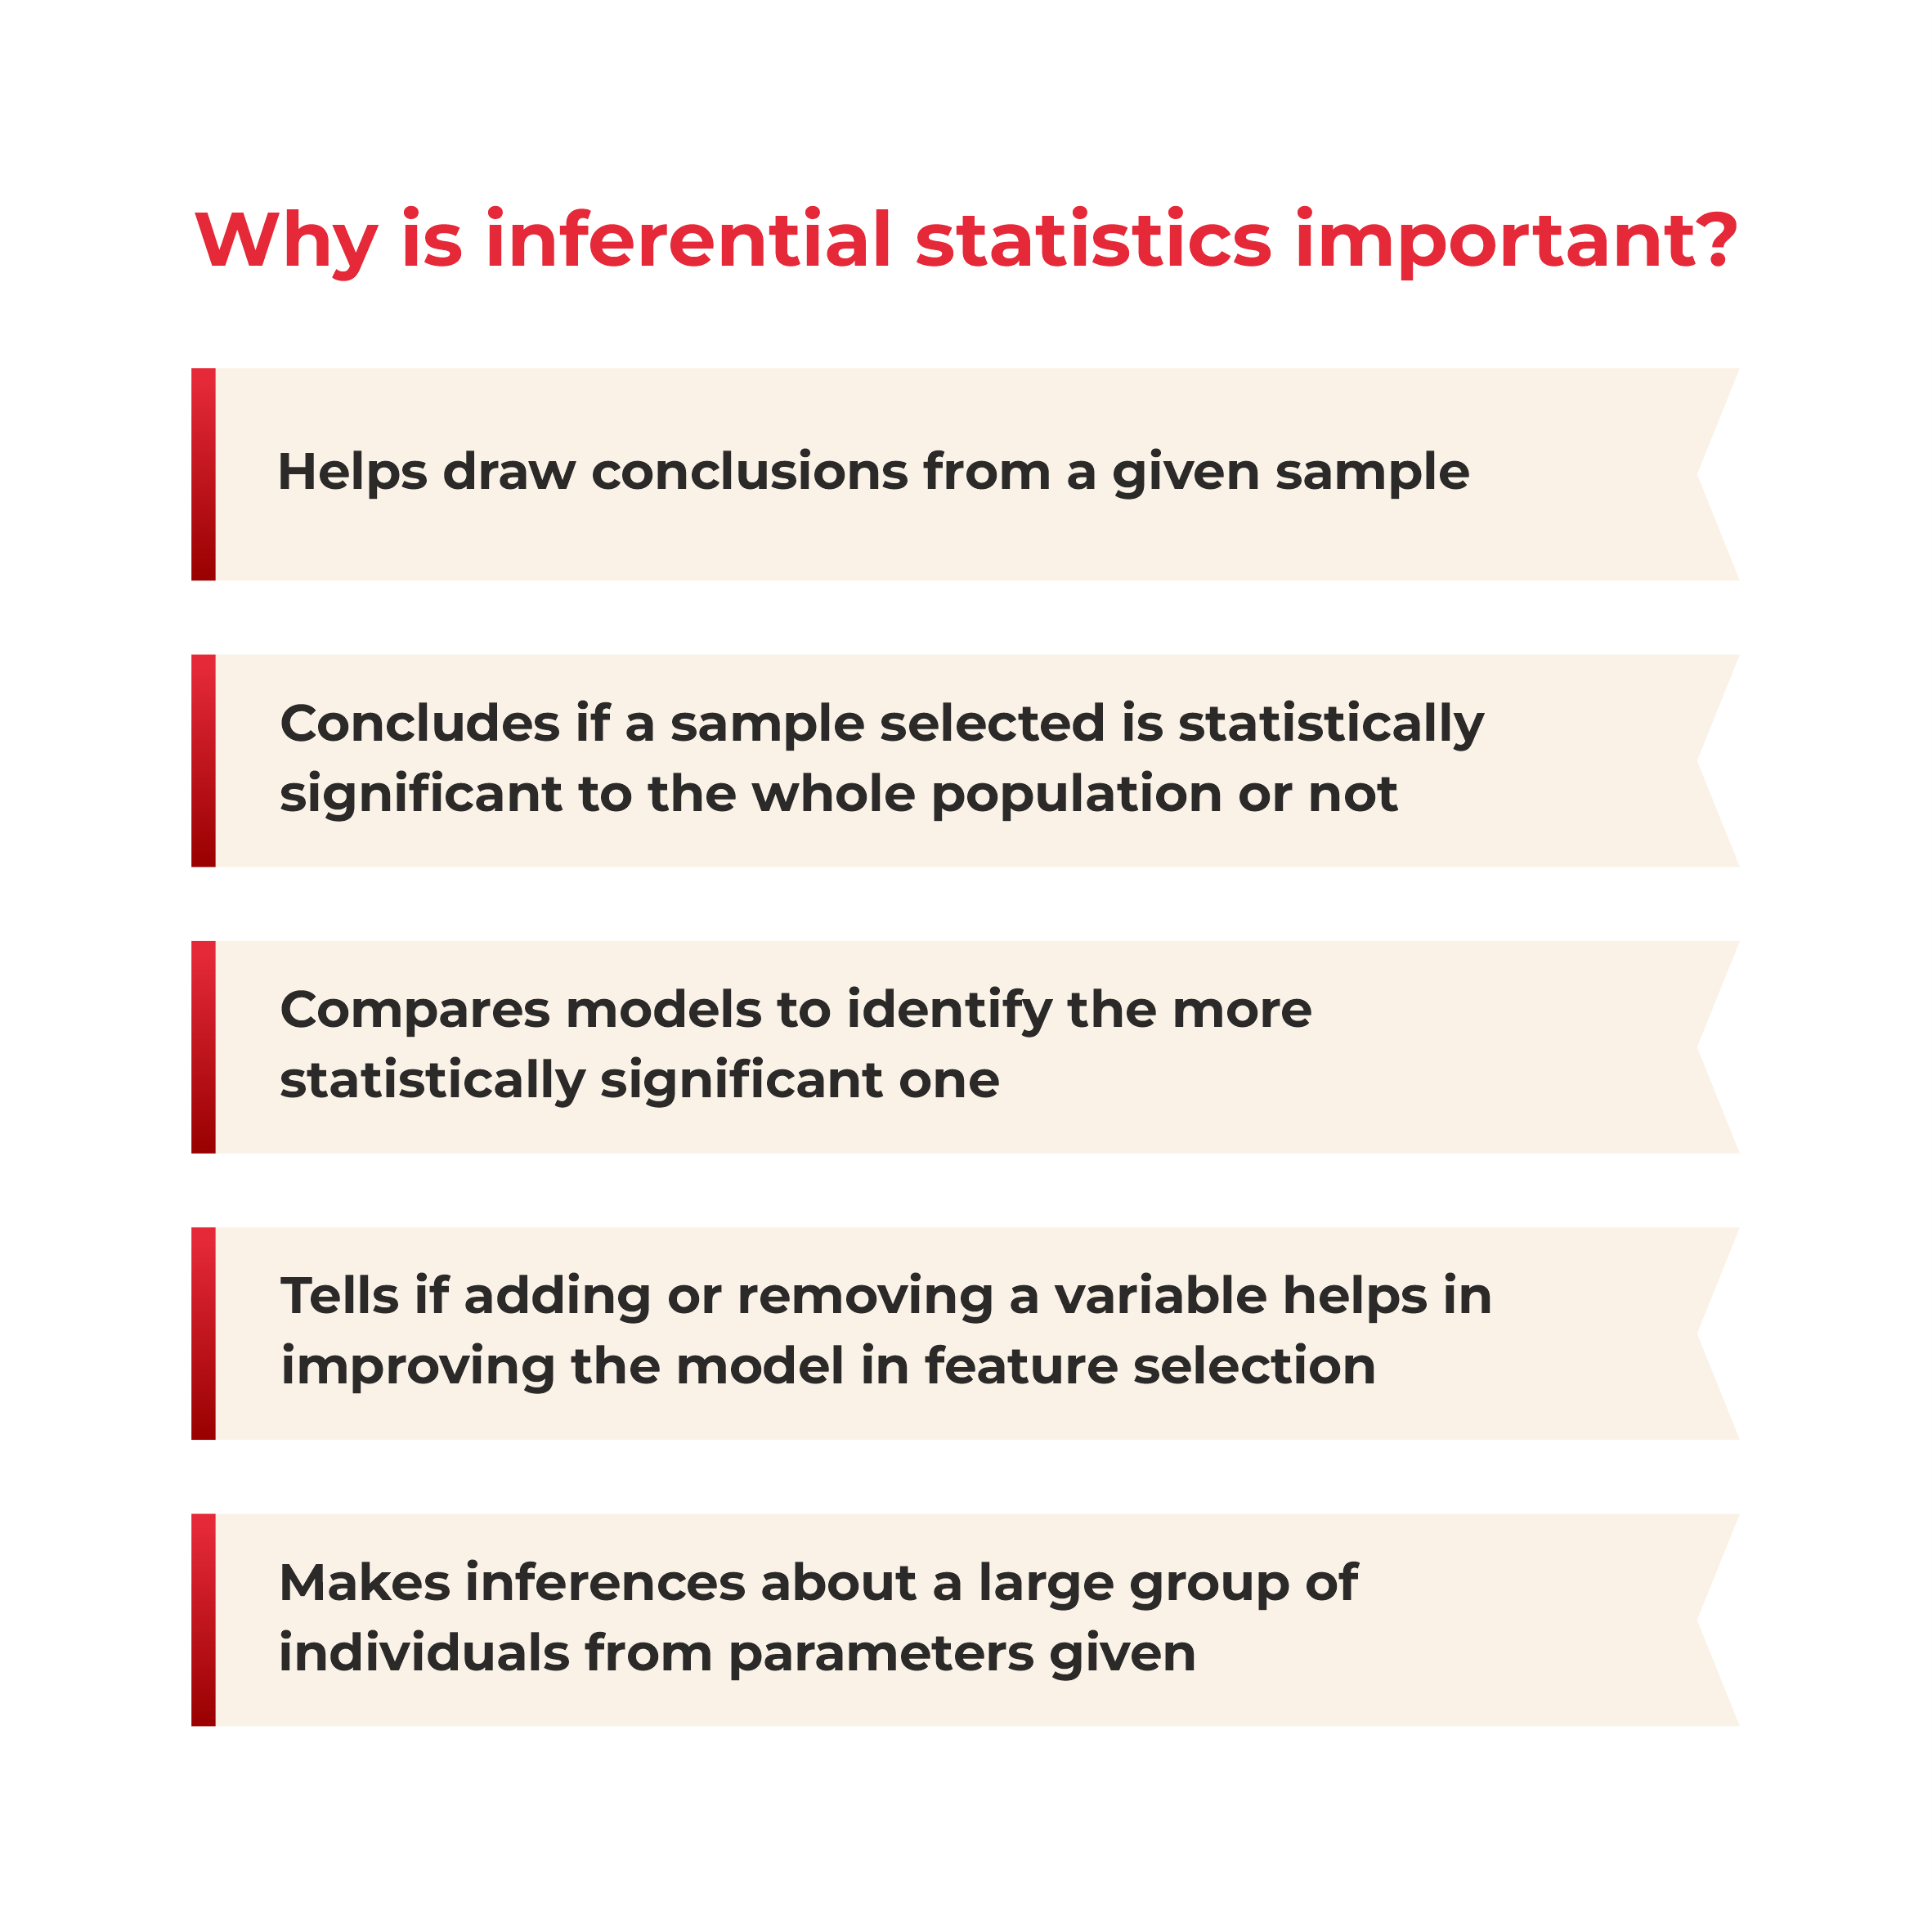 why inferential statistics important in data science